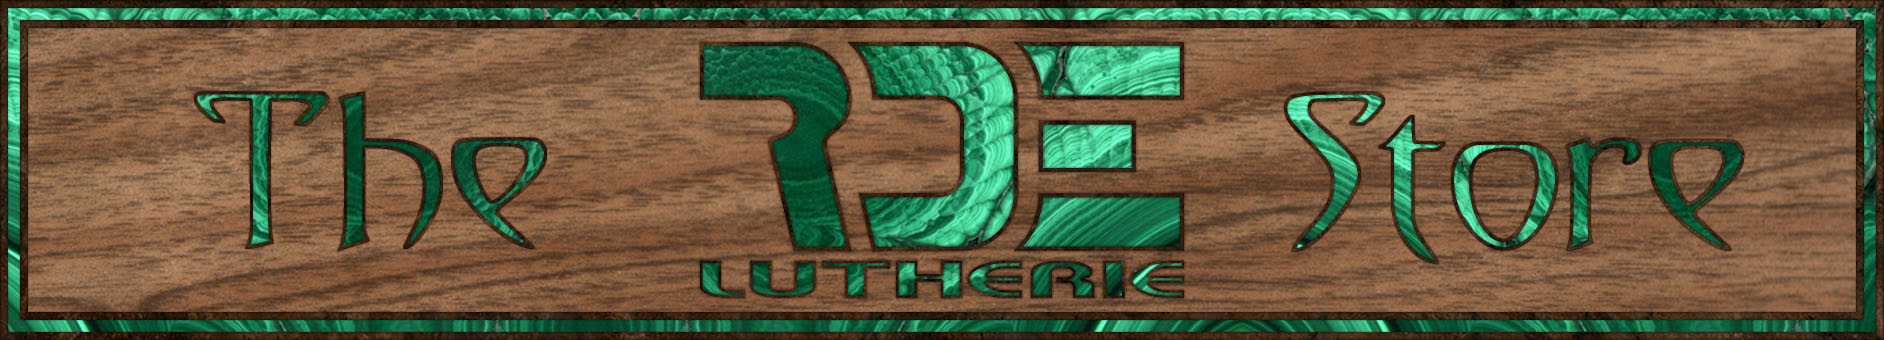 The RDE Lutherie store